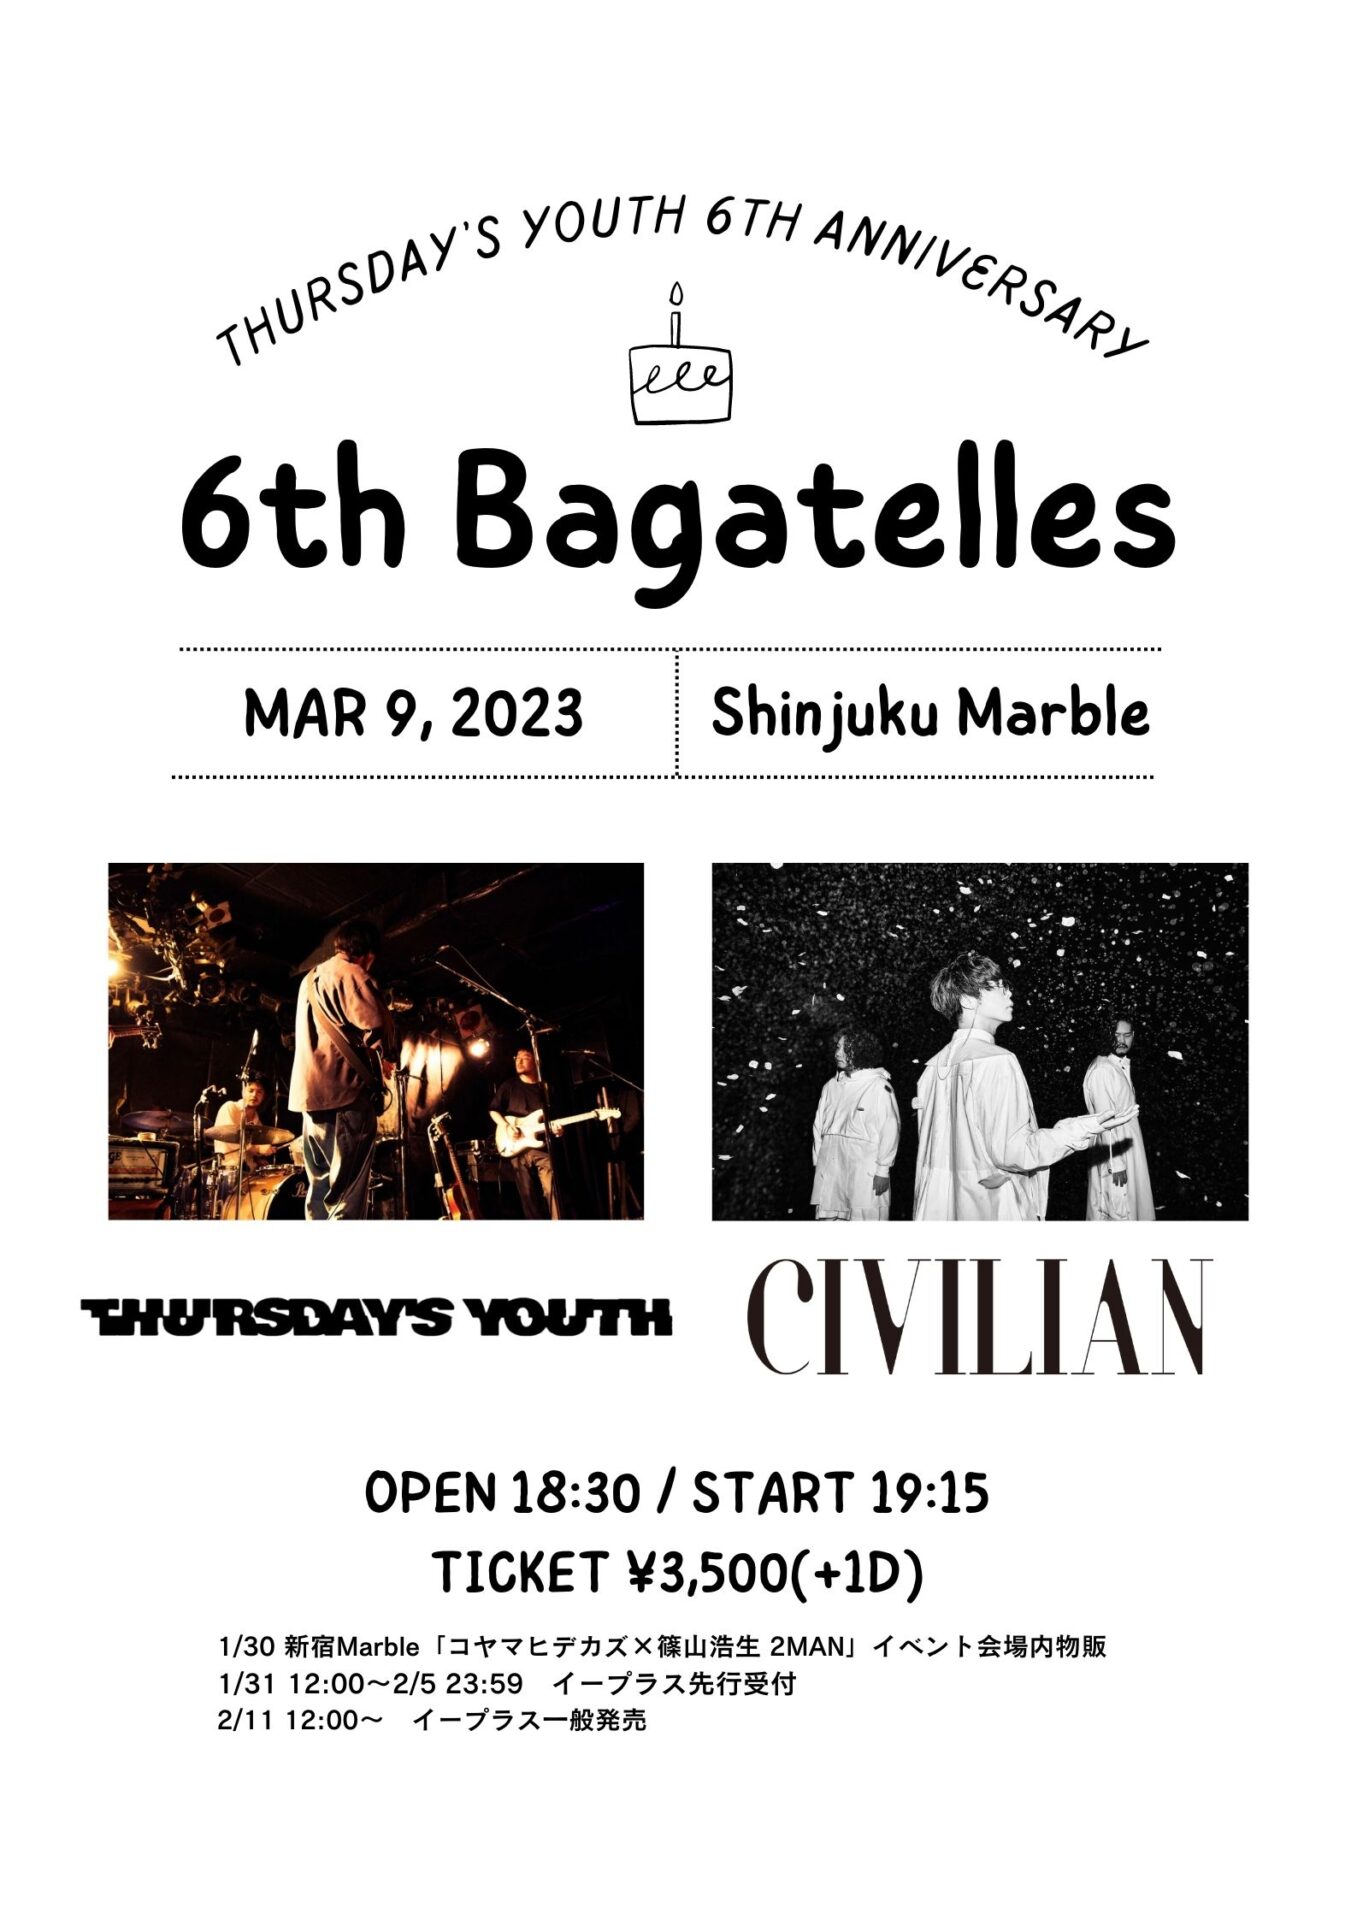 THURSDAY'S YOUTH 6th ANNIVERSARY「6th Bagatelles」